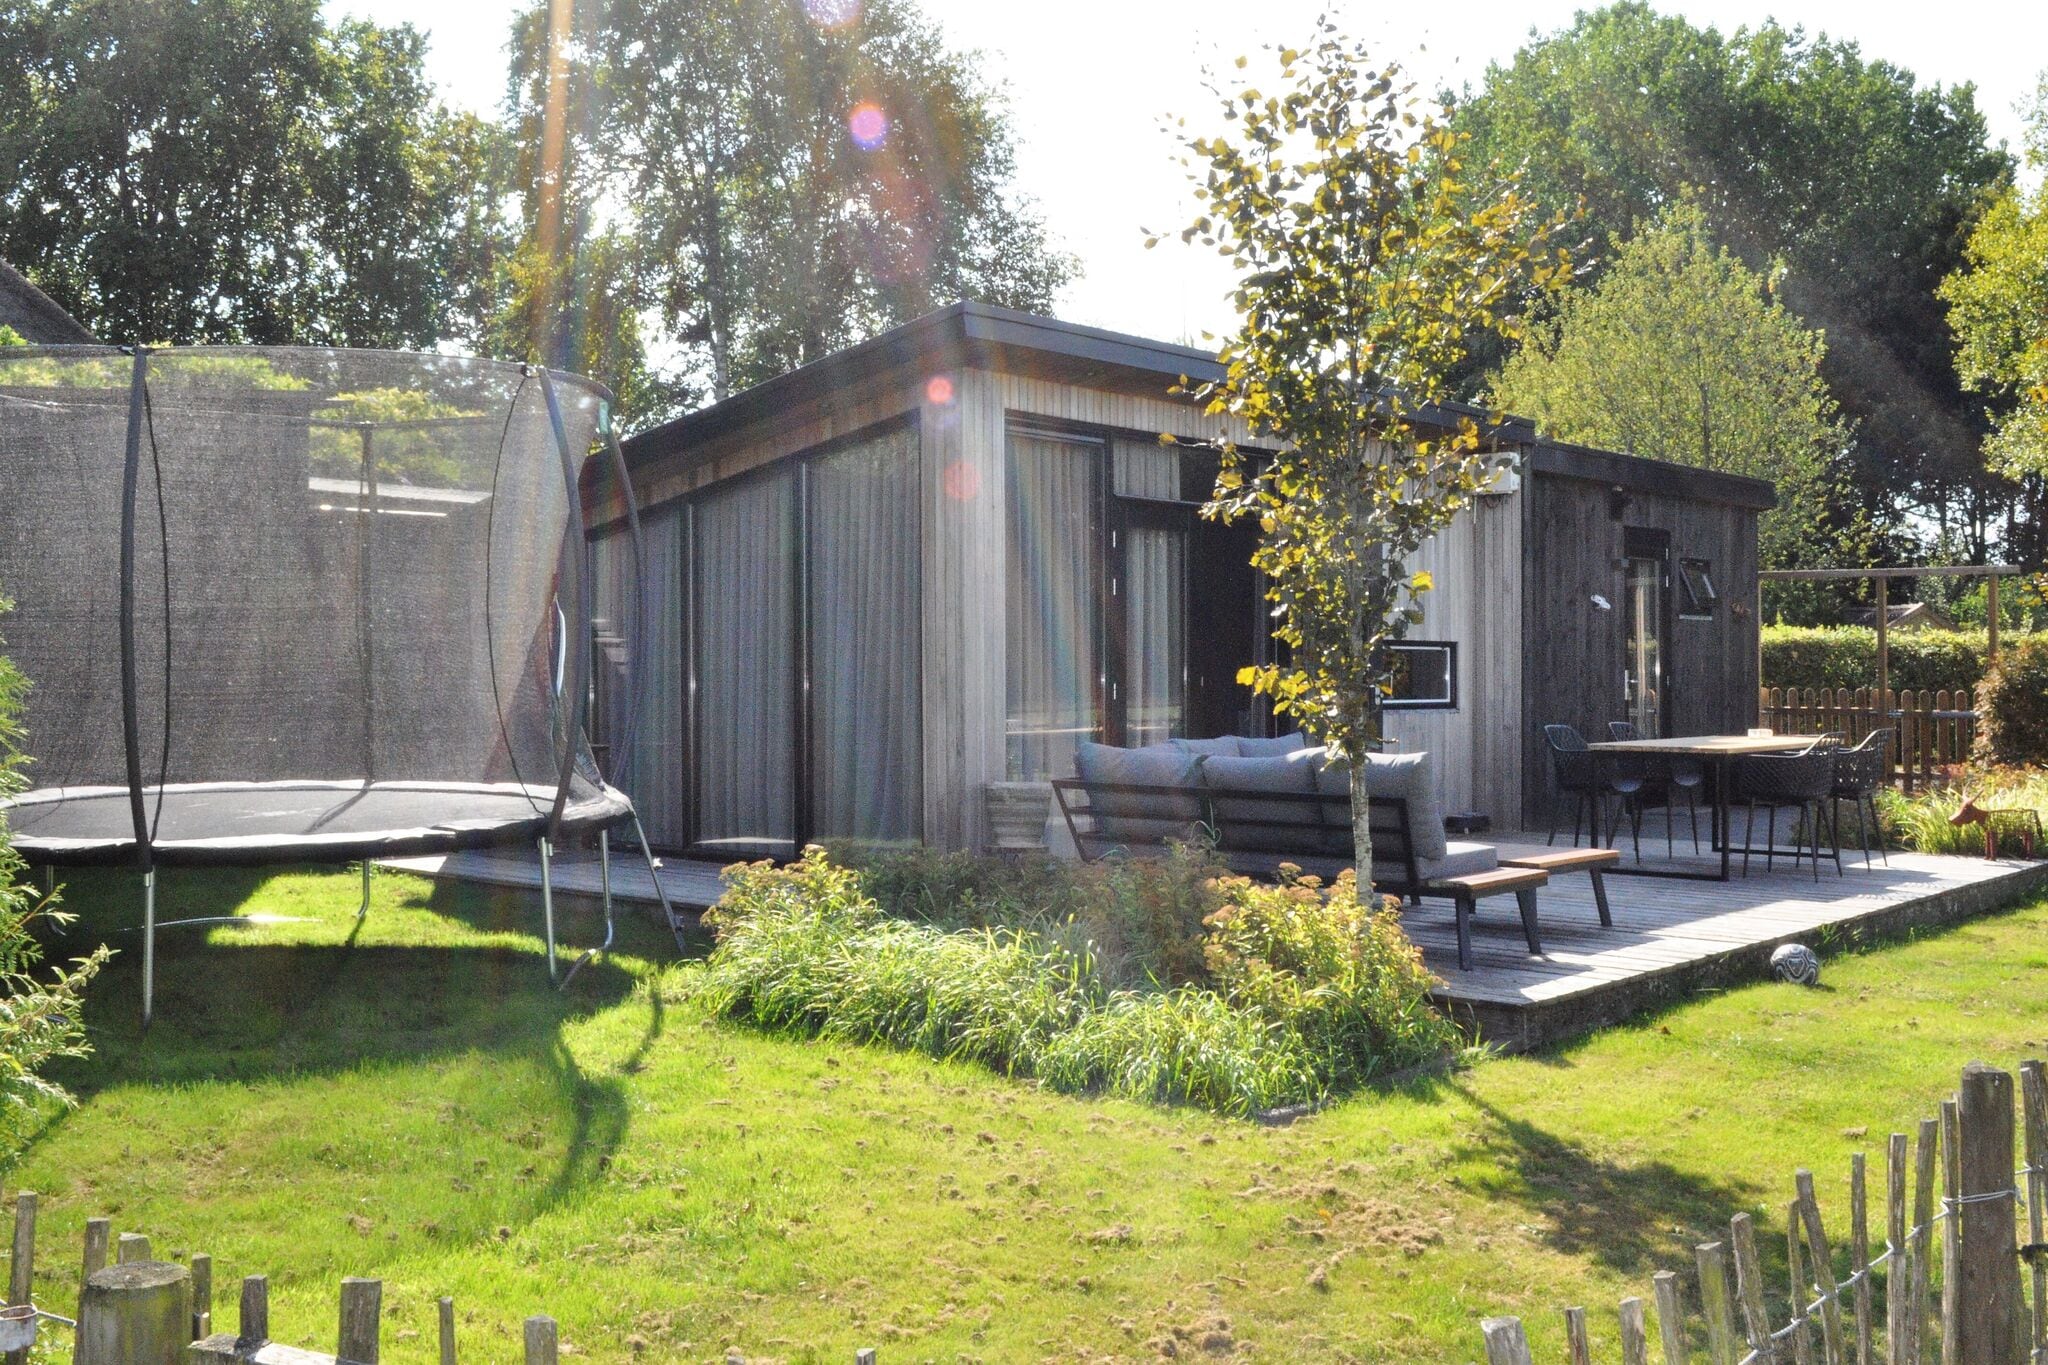 Detached chalet in Friesland with fenced garden